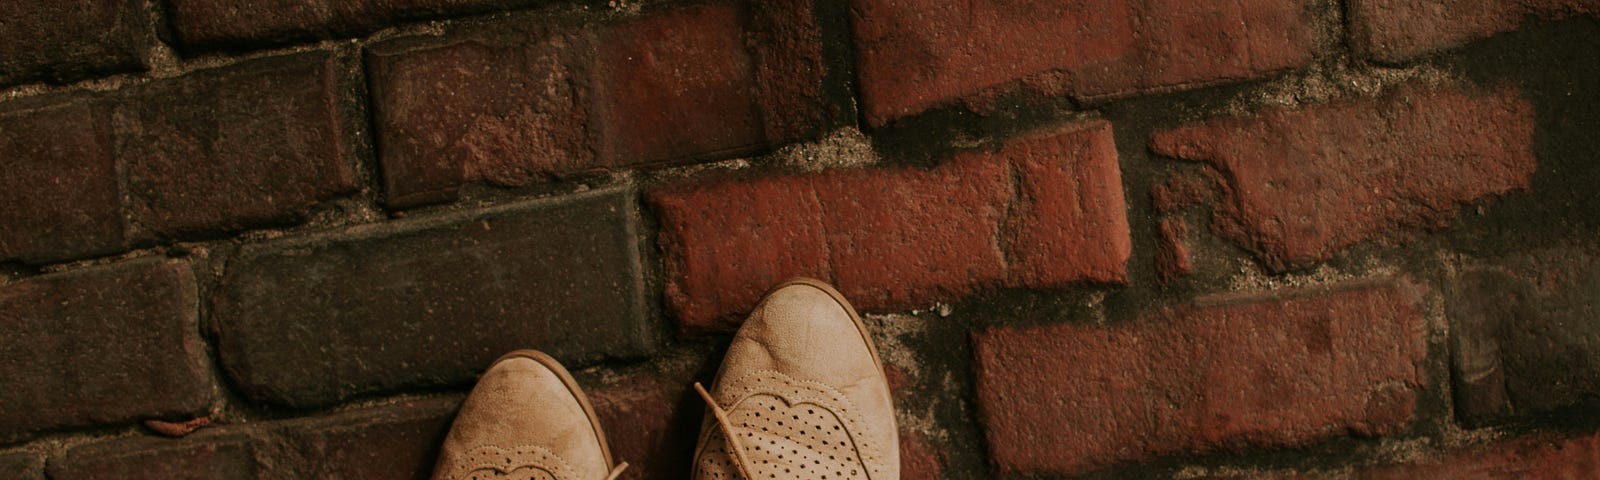 Photo of a brick floor with a person standing on it, the only thing in sight are a couple of cinamon colored leather shoes.